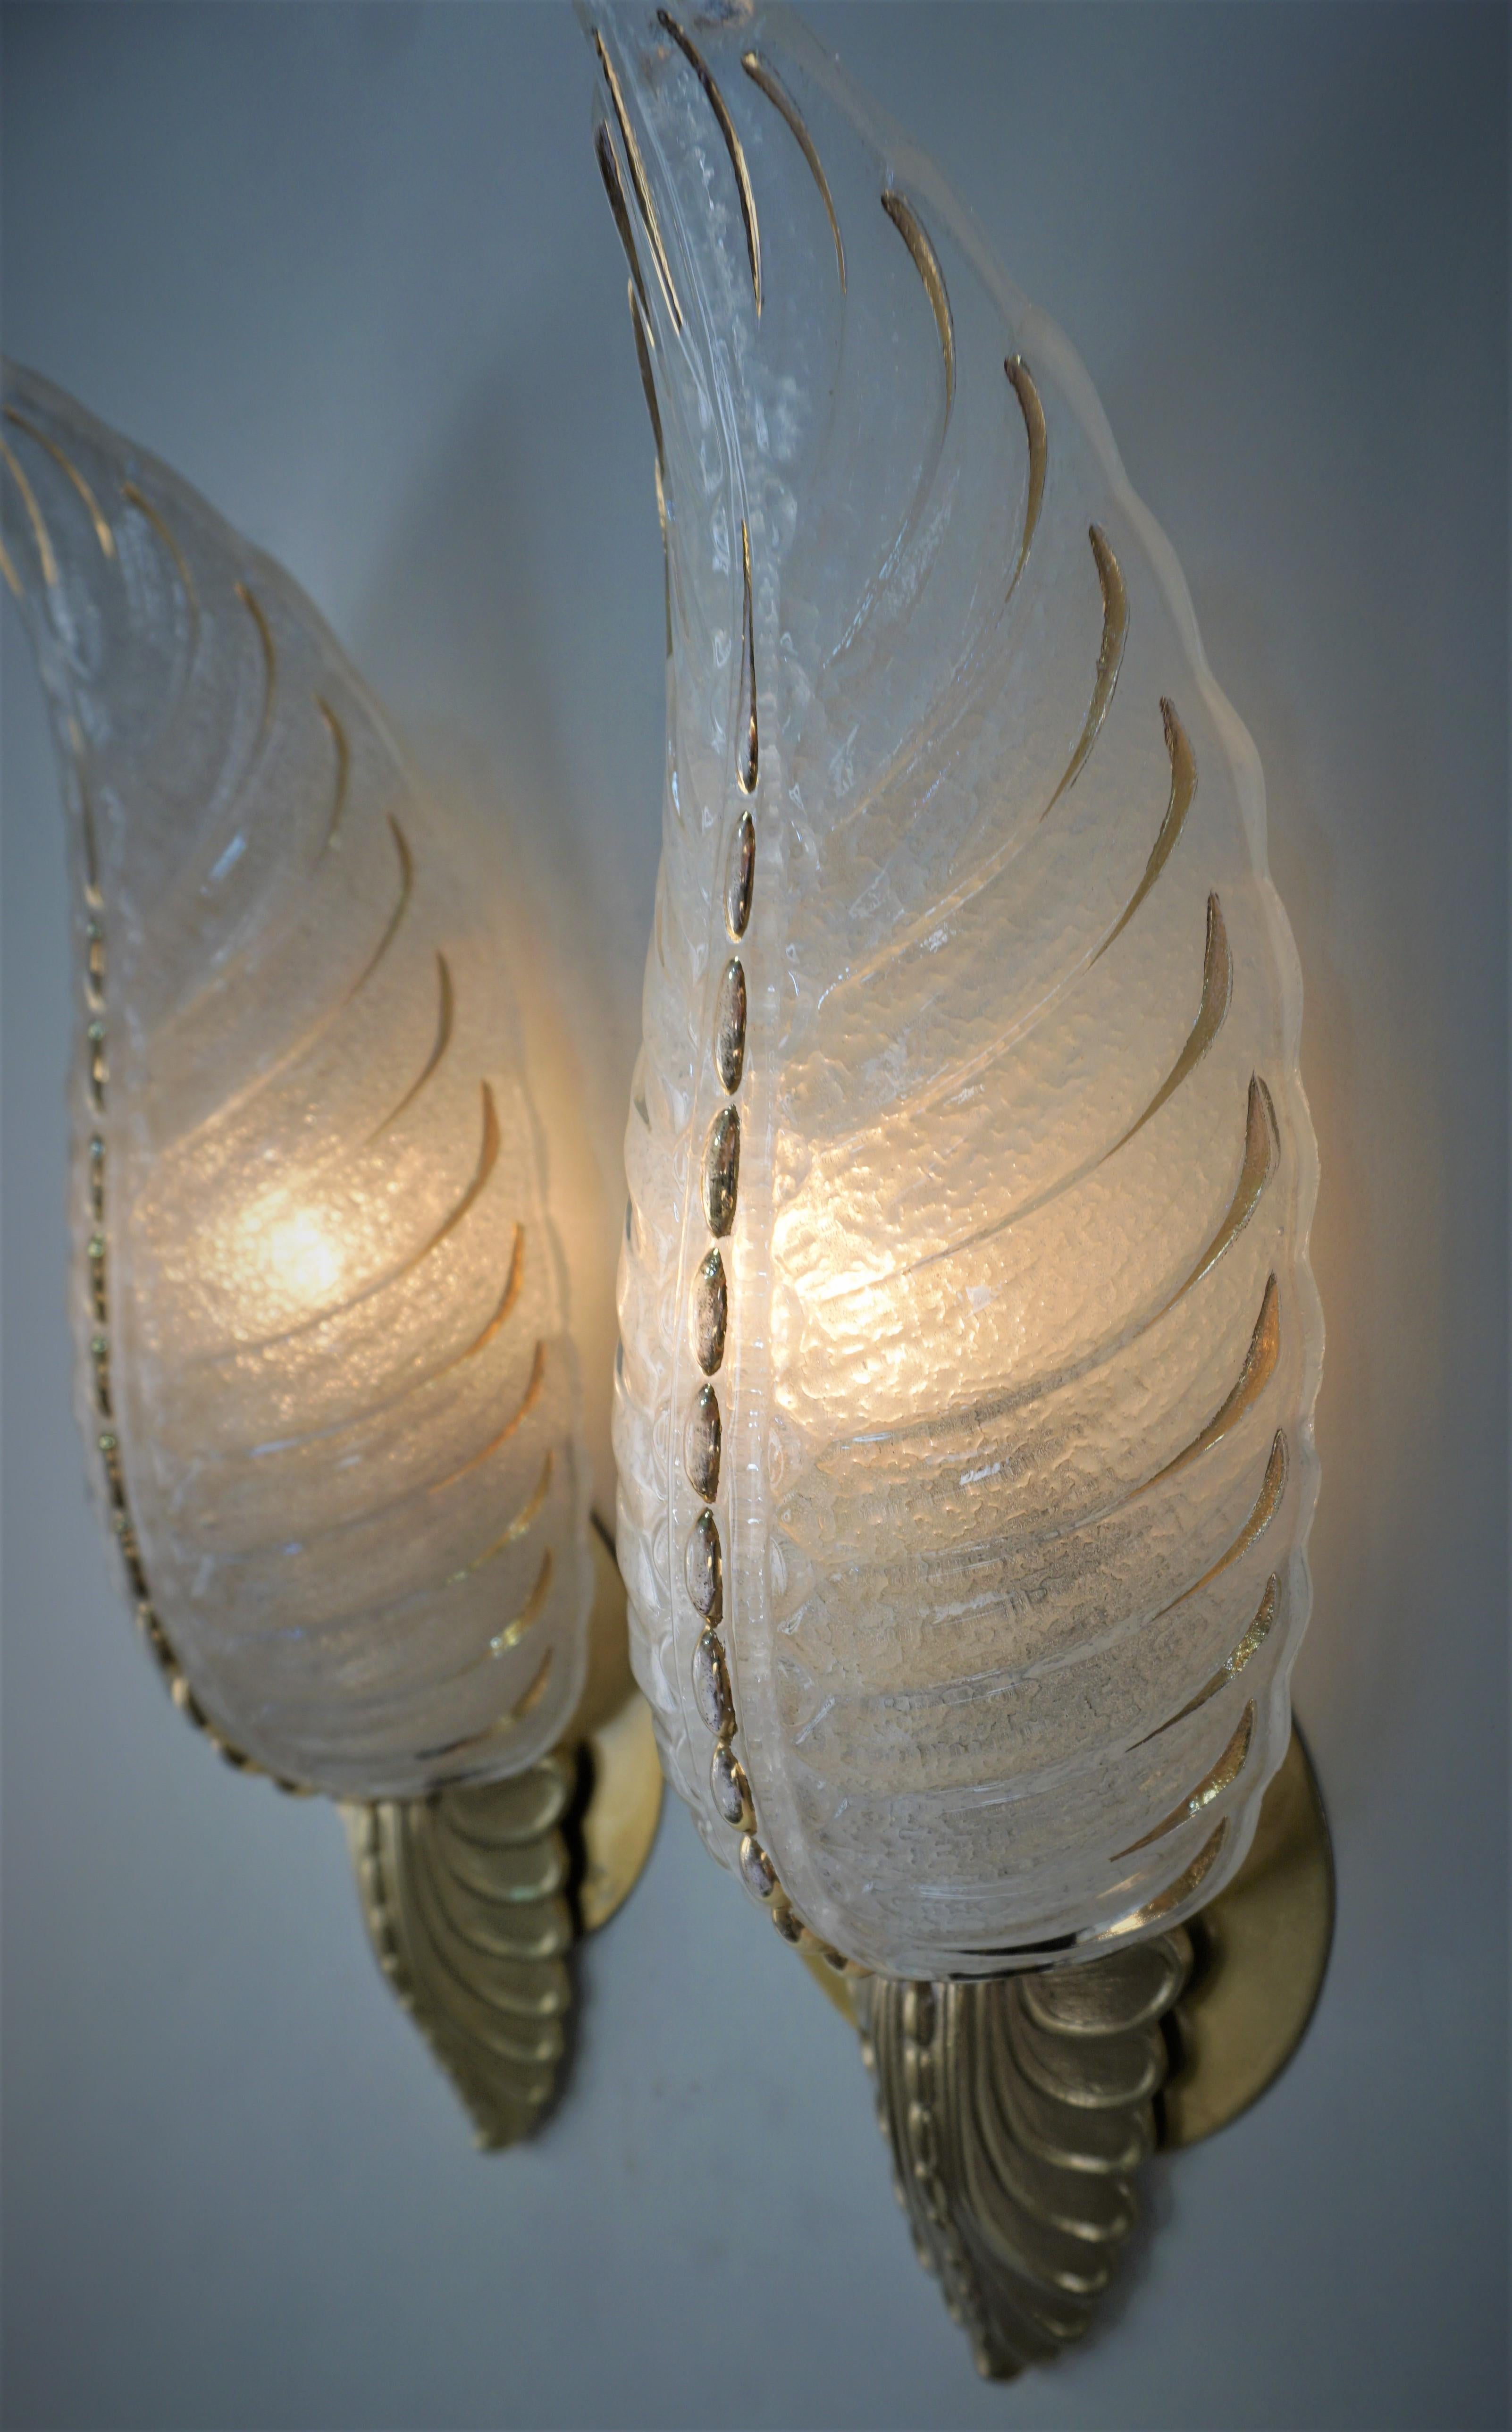  Pair of Art Deco, 1930s, Wall Sconces by Ezan, France In Good Condition For Sale In Fairfax, VA